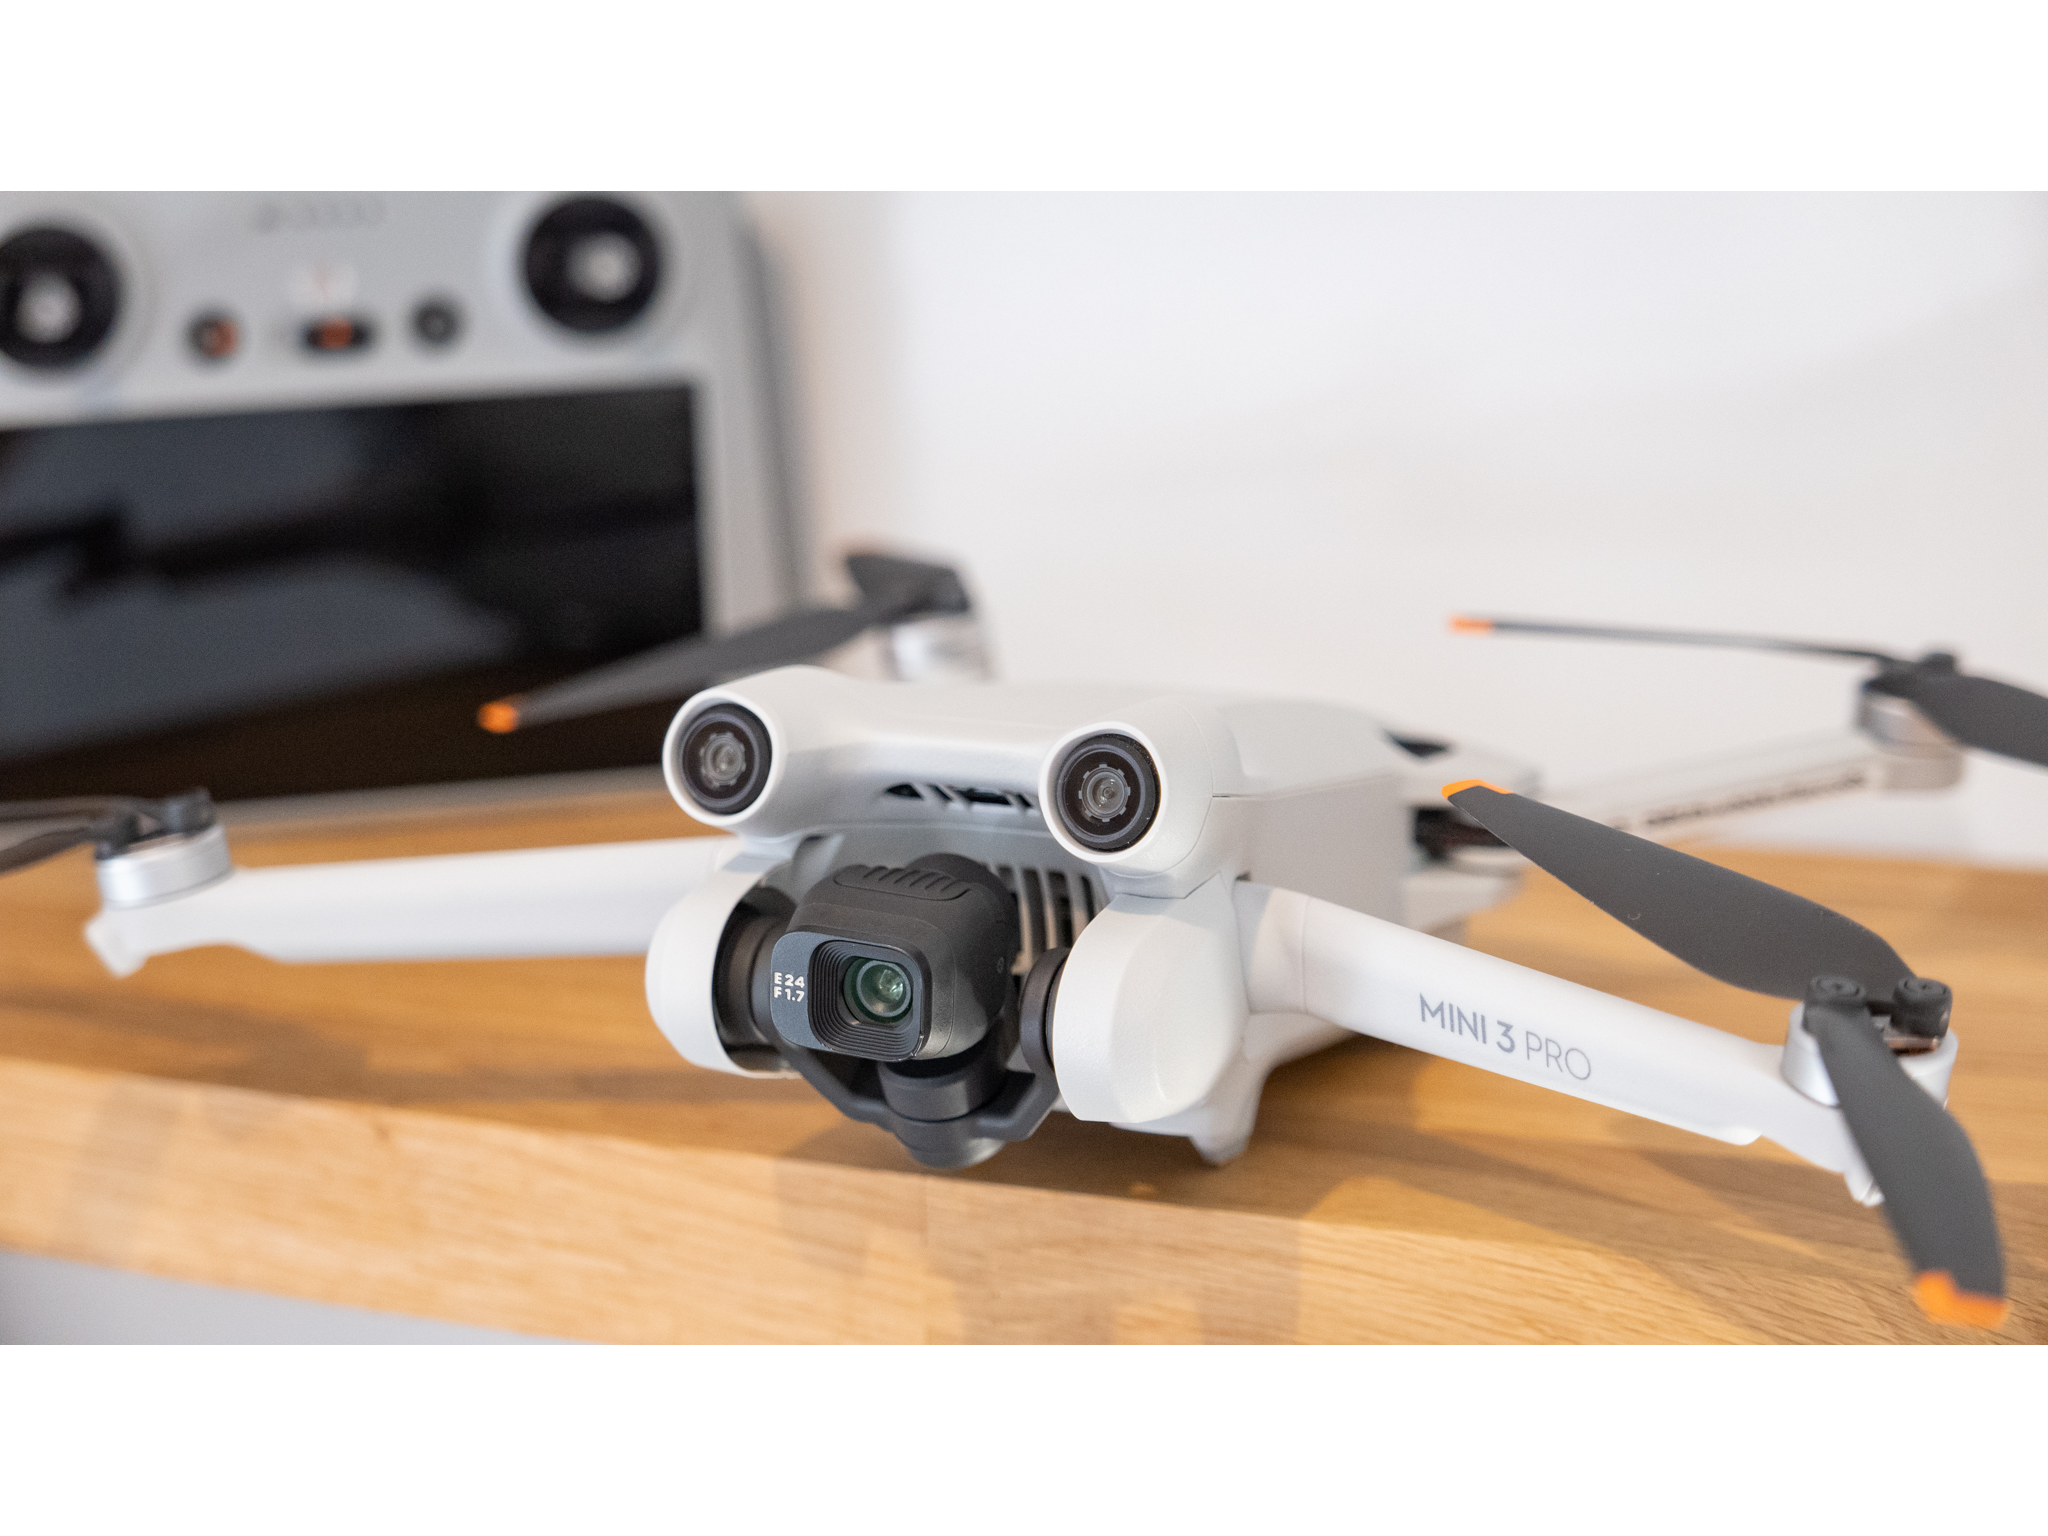 DJI Mini 3 Pro Drone: Hands-On Review with AndrewOptics - 42West